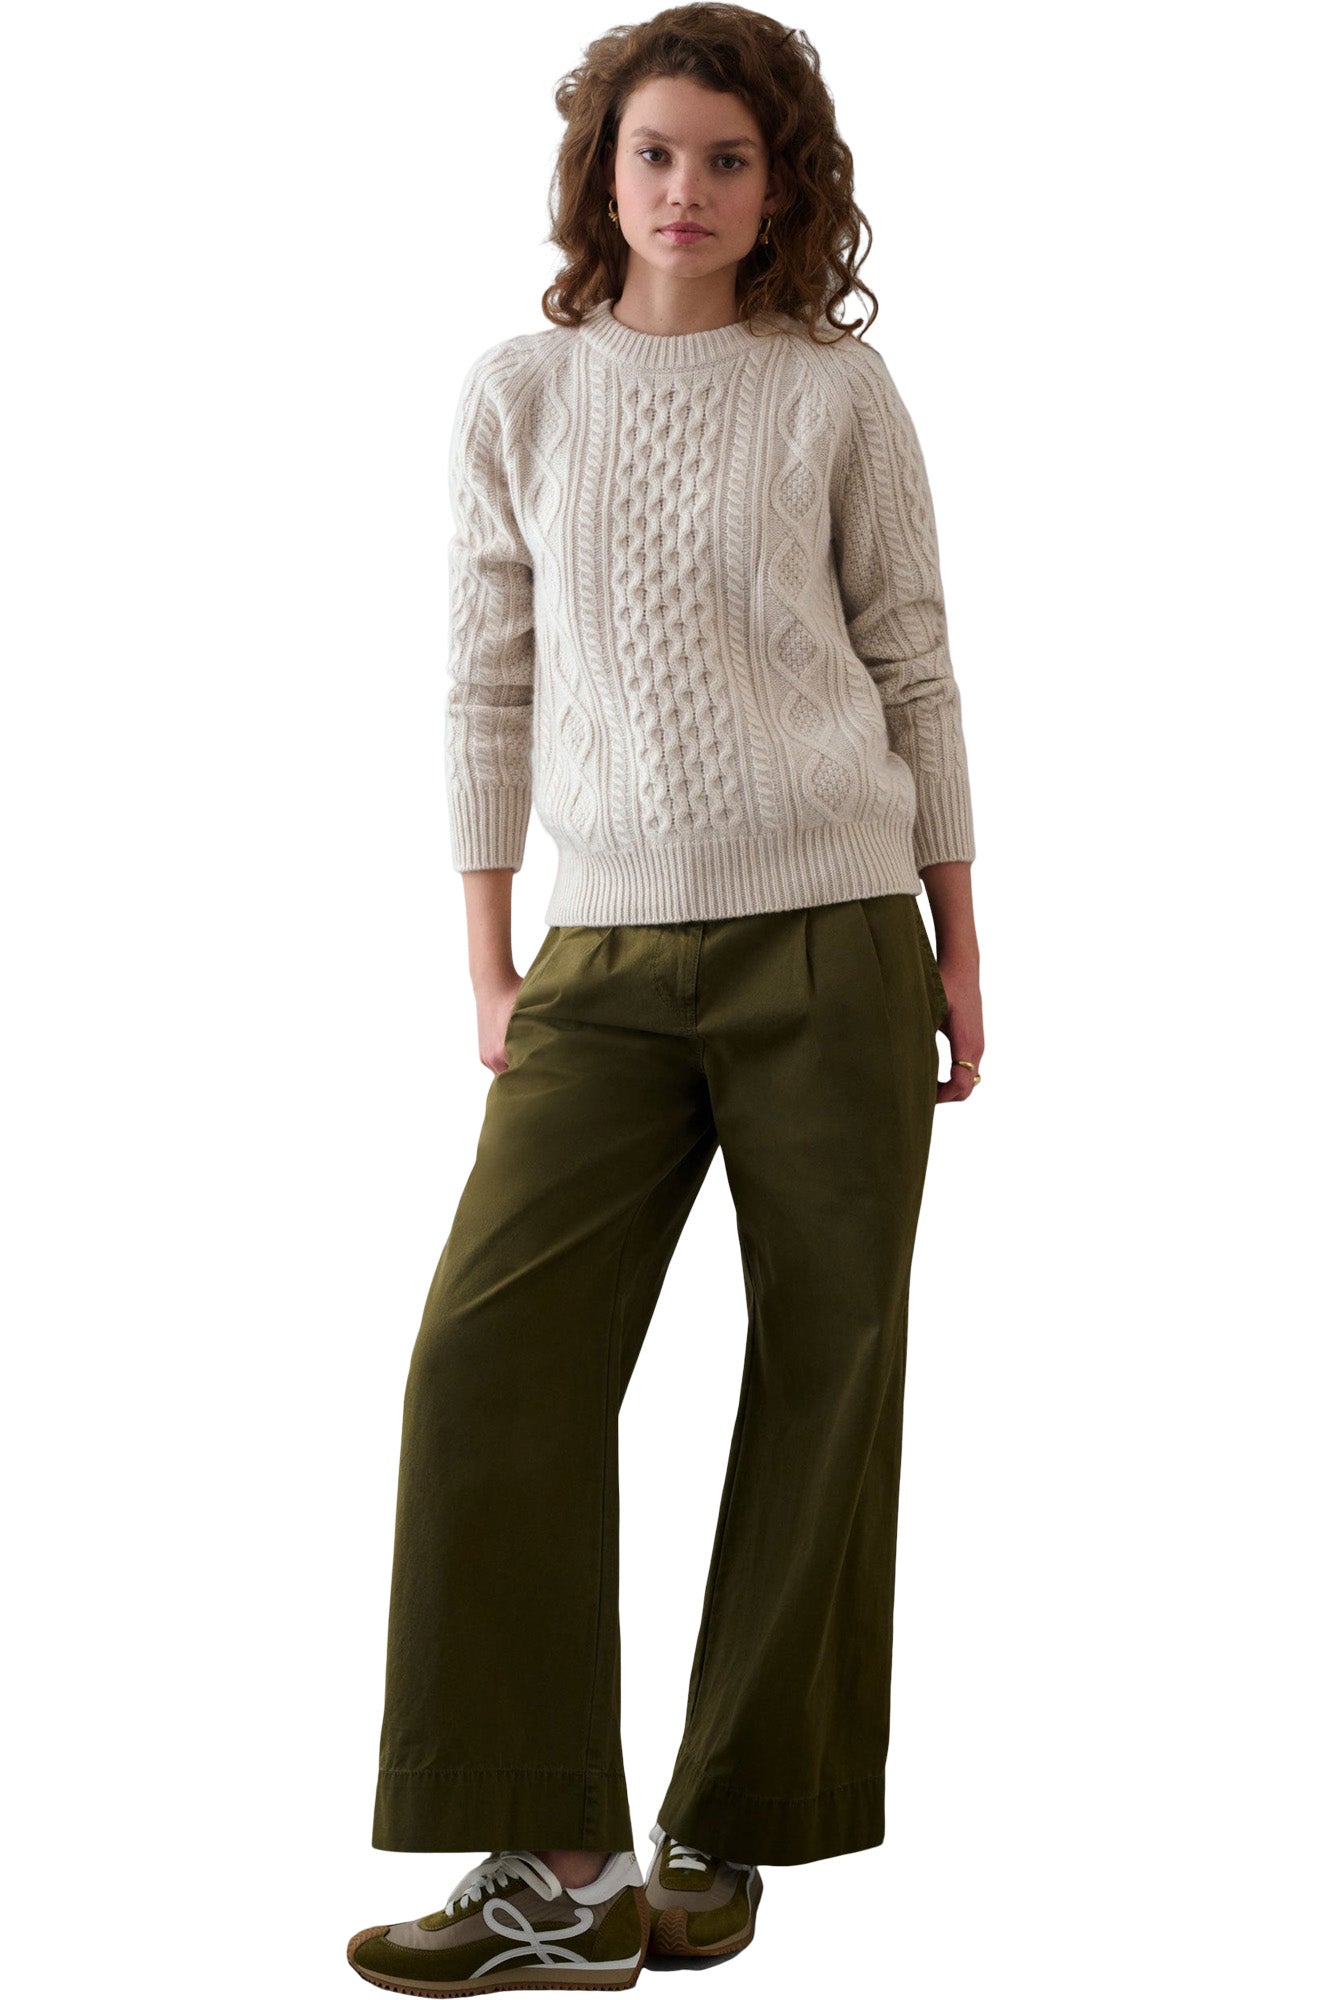 White & Warren Cashmere Luxe Cable Sweater in Natural Heather